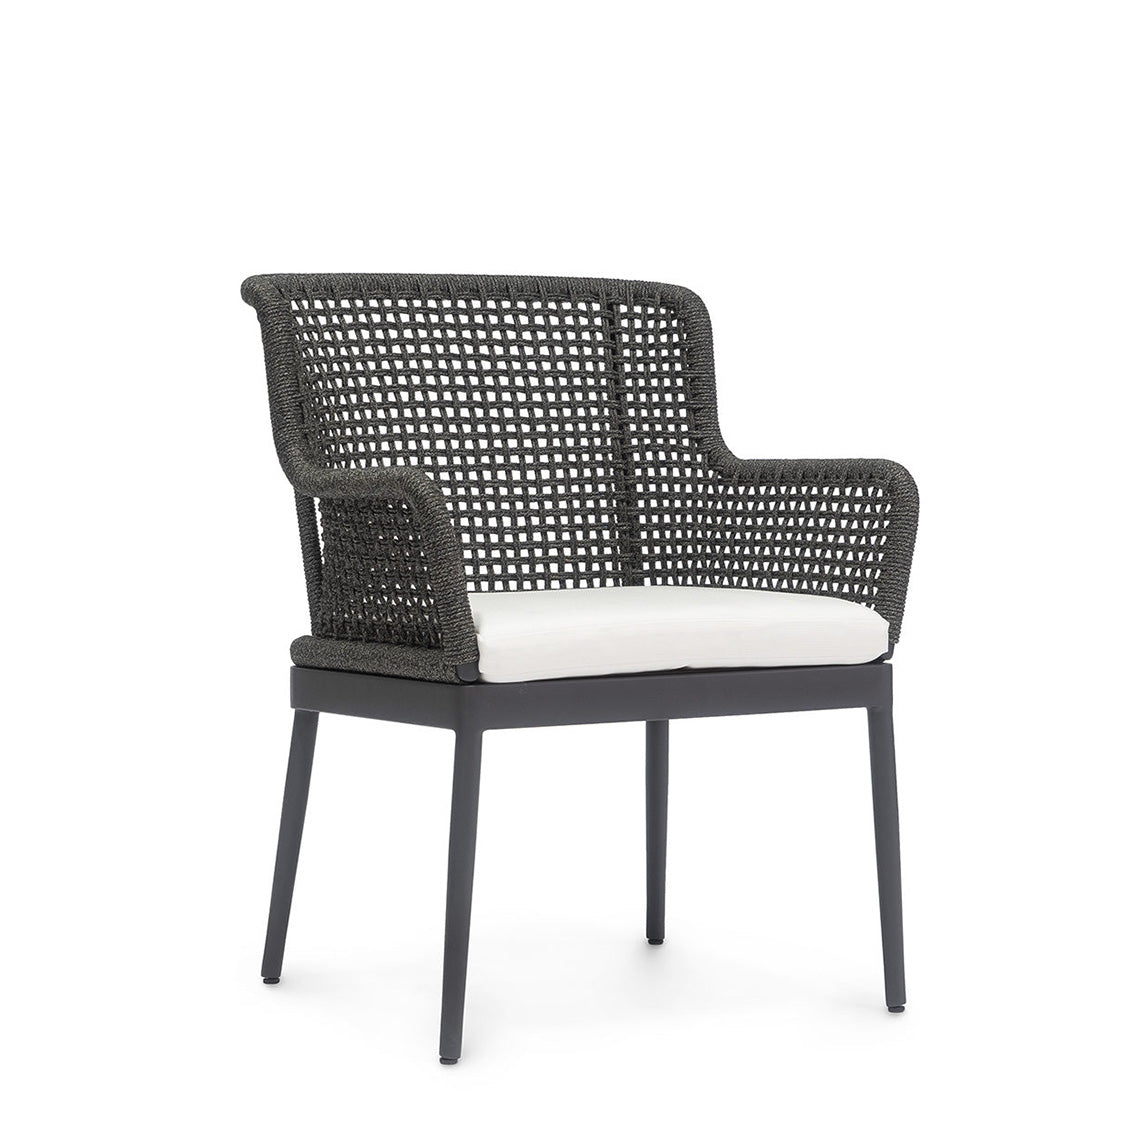 Somerset Outdoor Arm Chair Charcoal